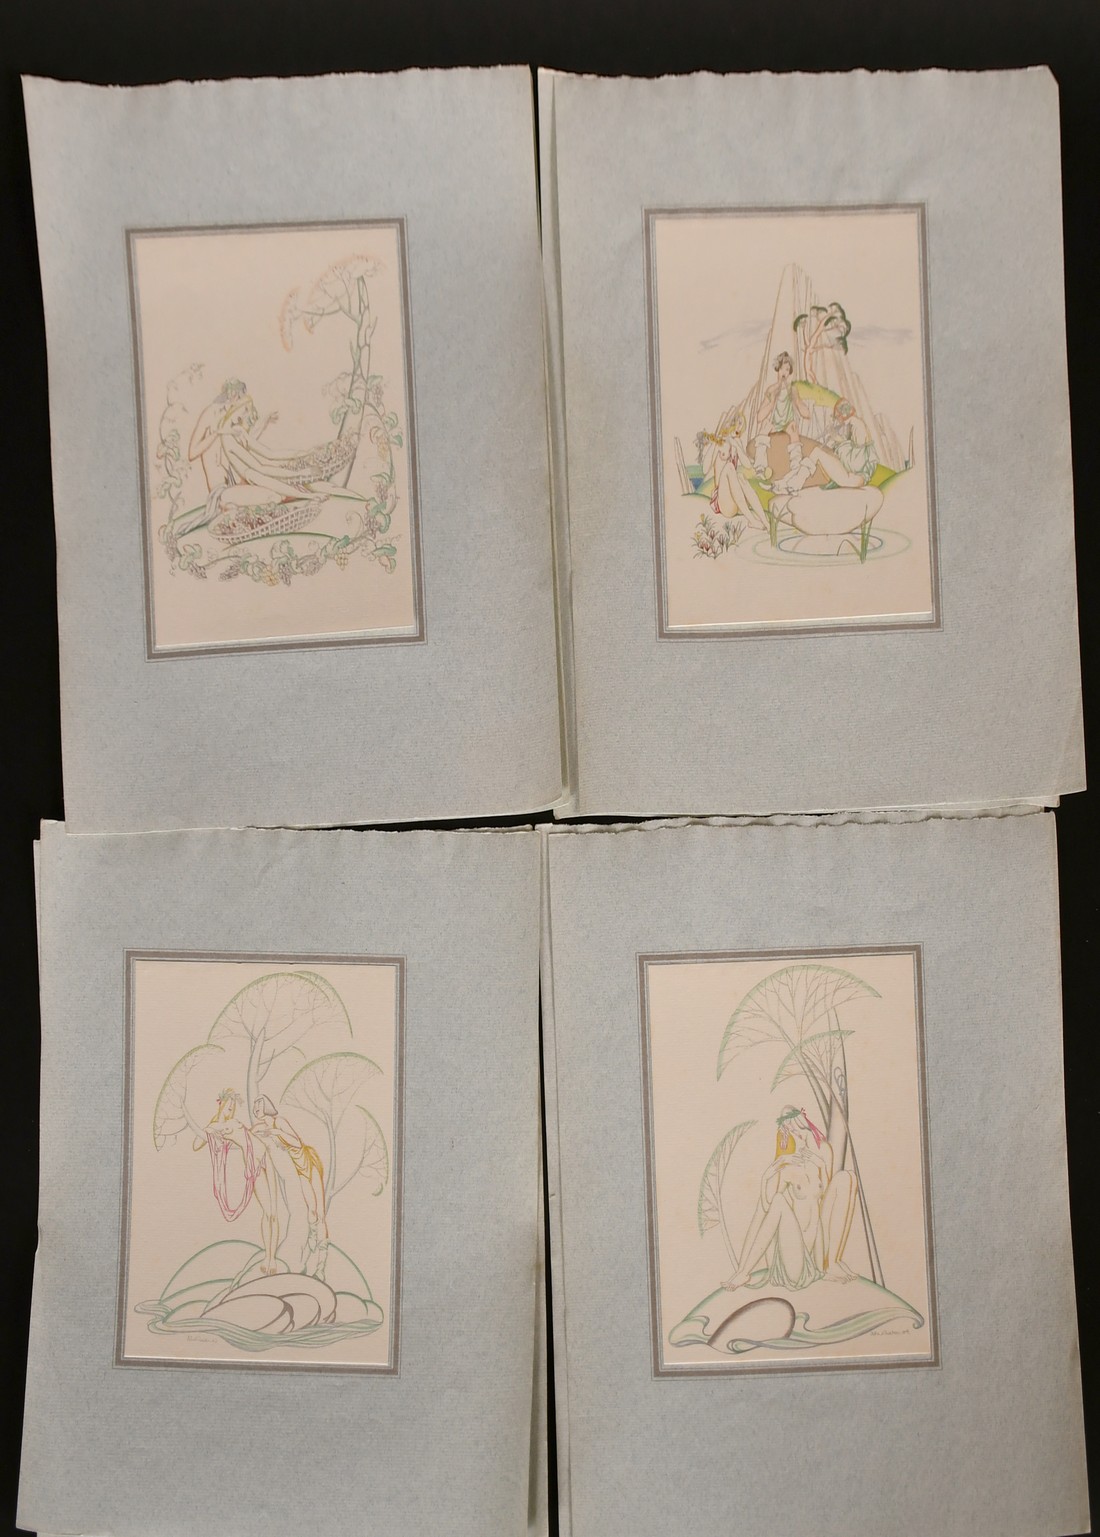 John Austen, A collection of twelve semi-erotic prints, one signed in pencil on the mount, 7" x 5. - Image 2 of 3